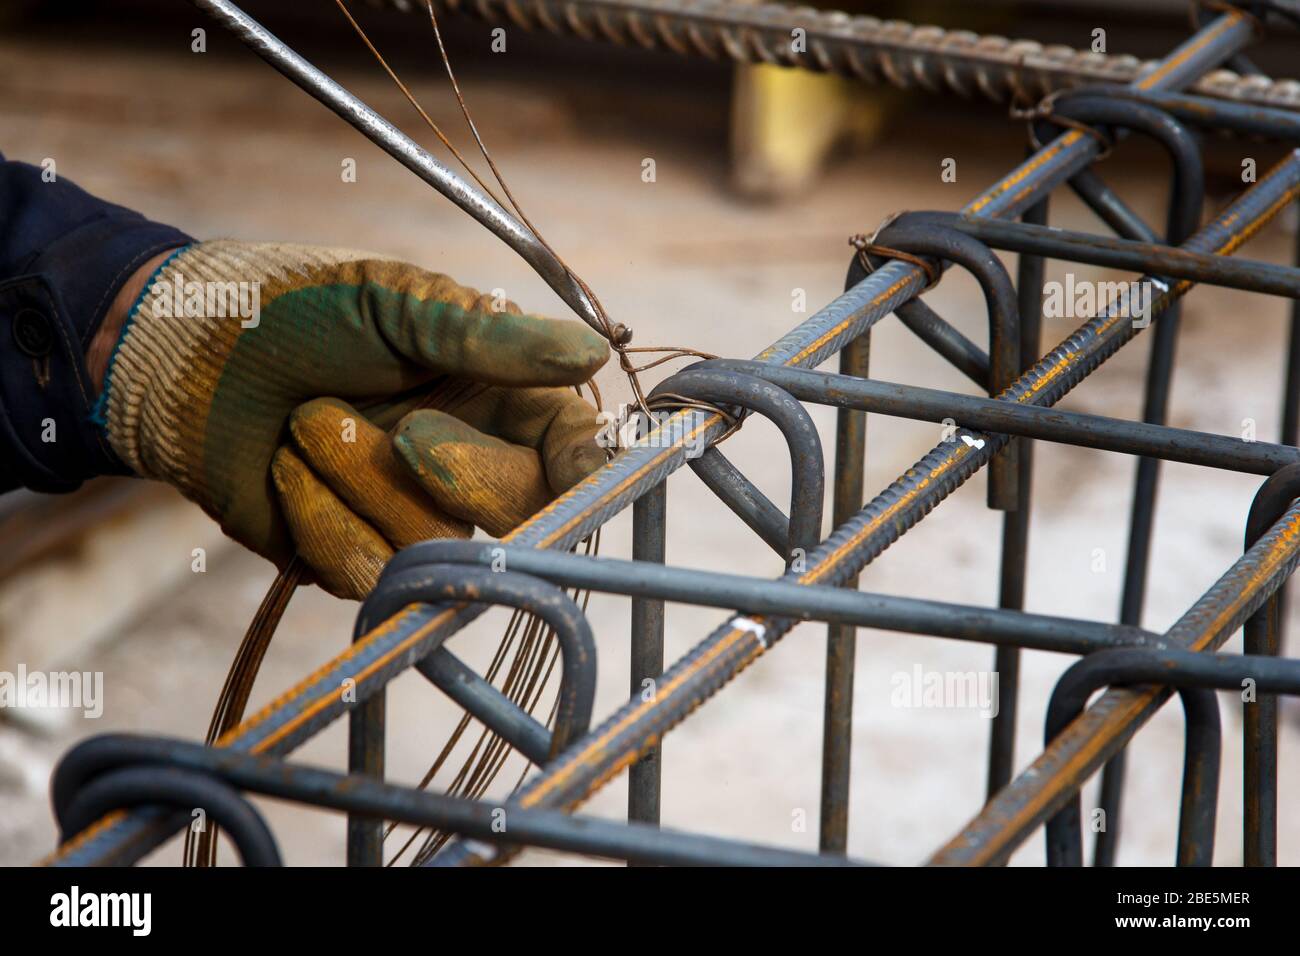 Assembly of reinforcing bars for pouring concrete. Construction worker fabricating steel reinforcement bars. Preparation for concrete work.Wire mounti Stock Photo